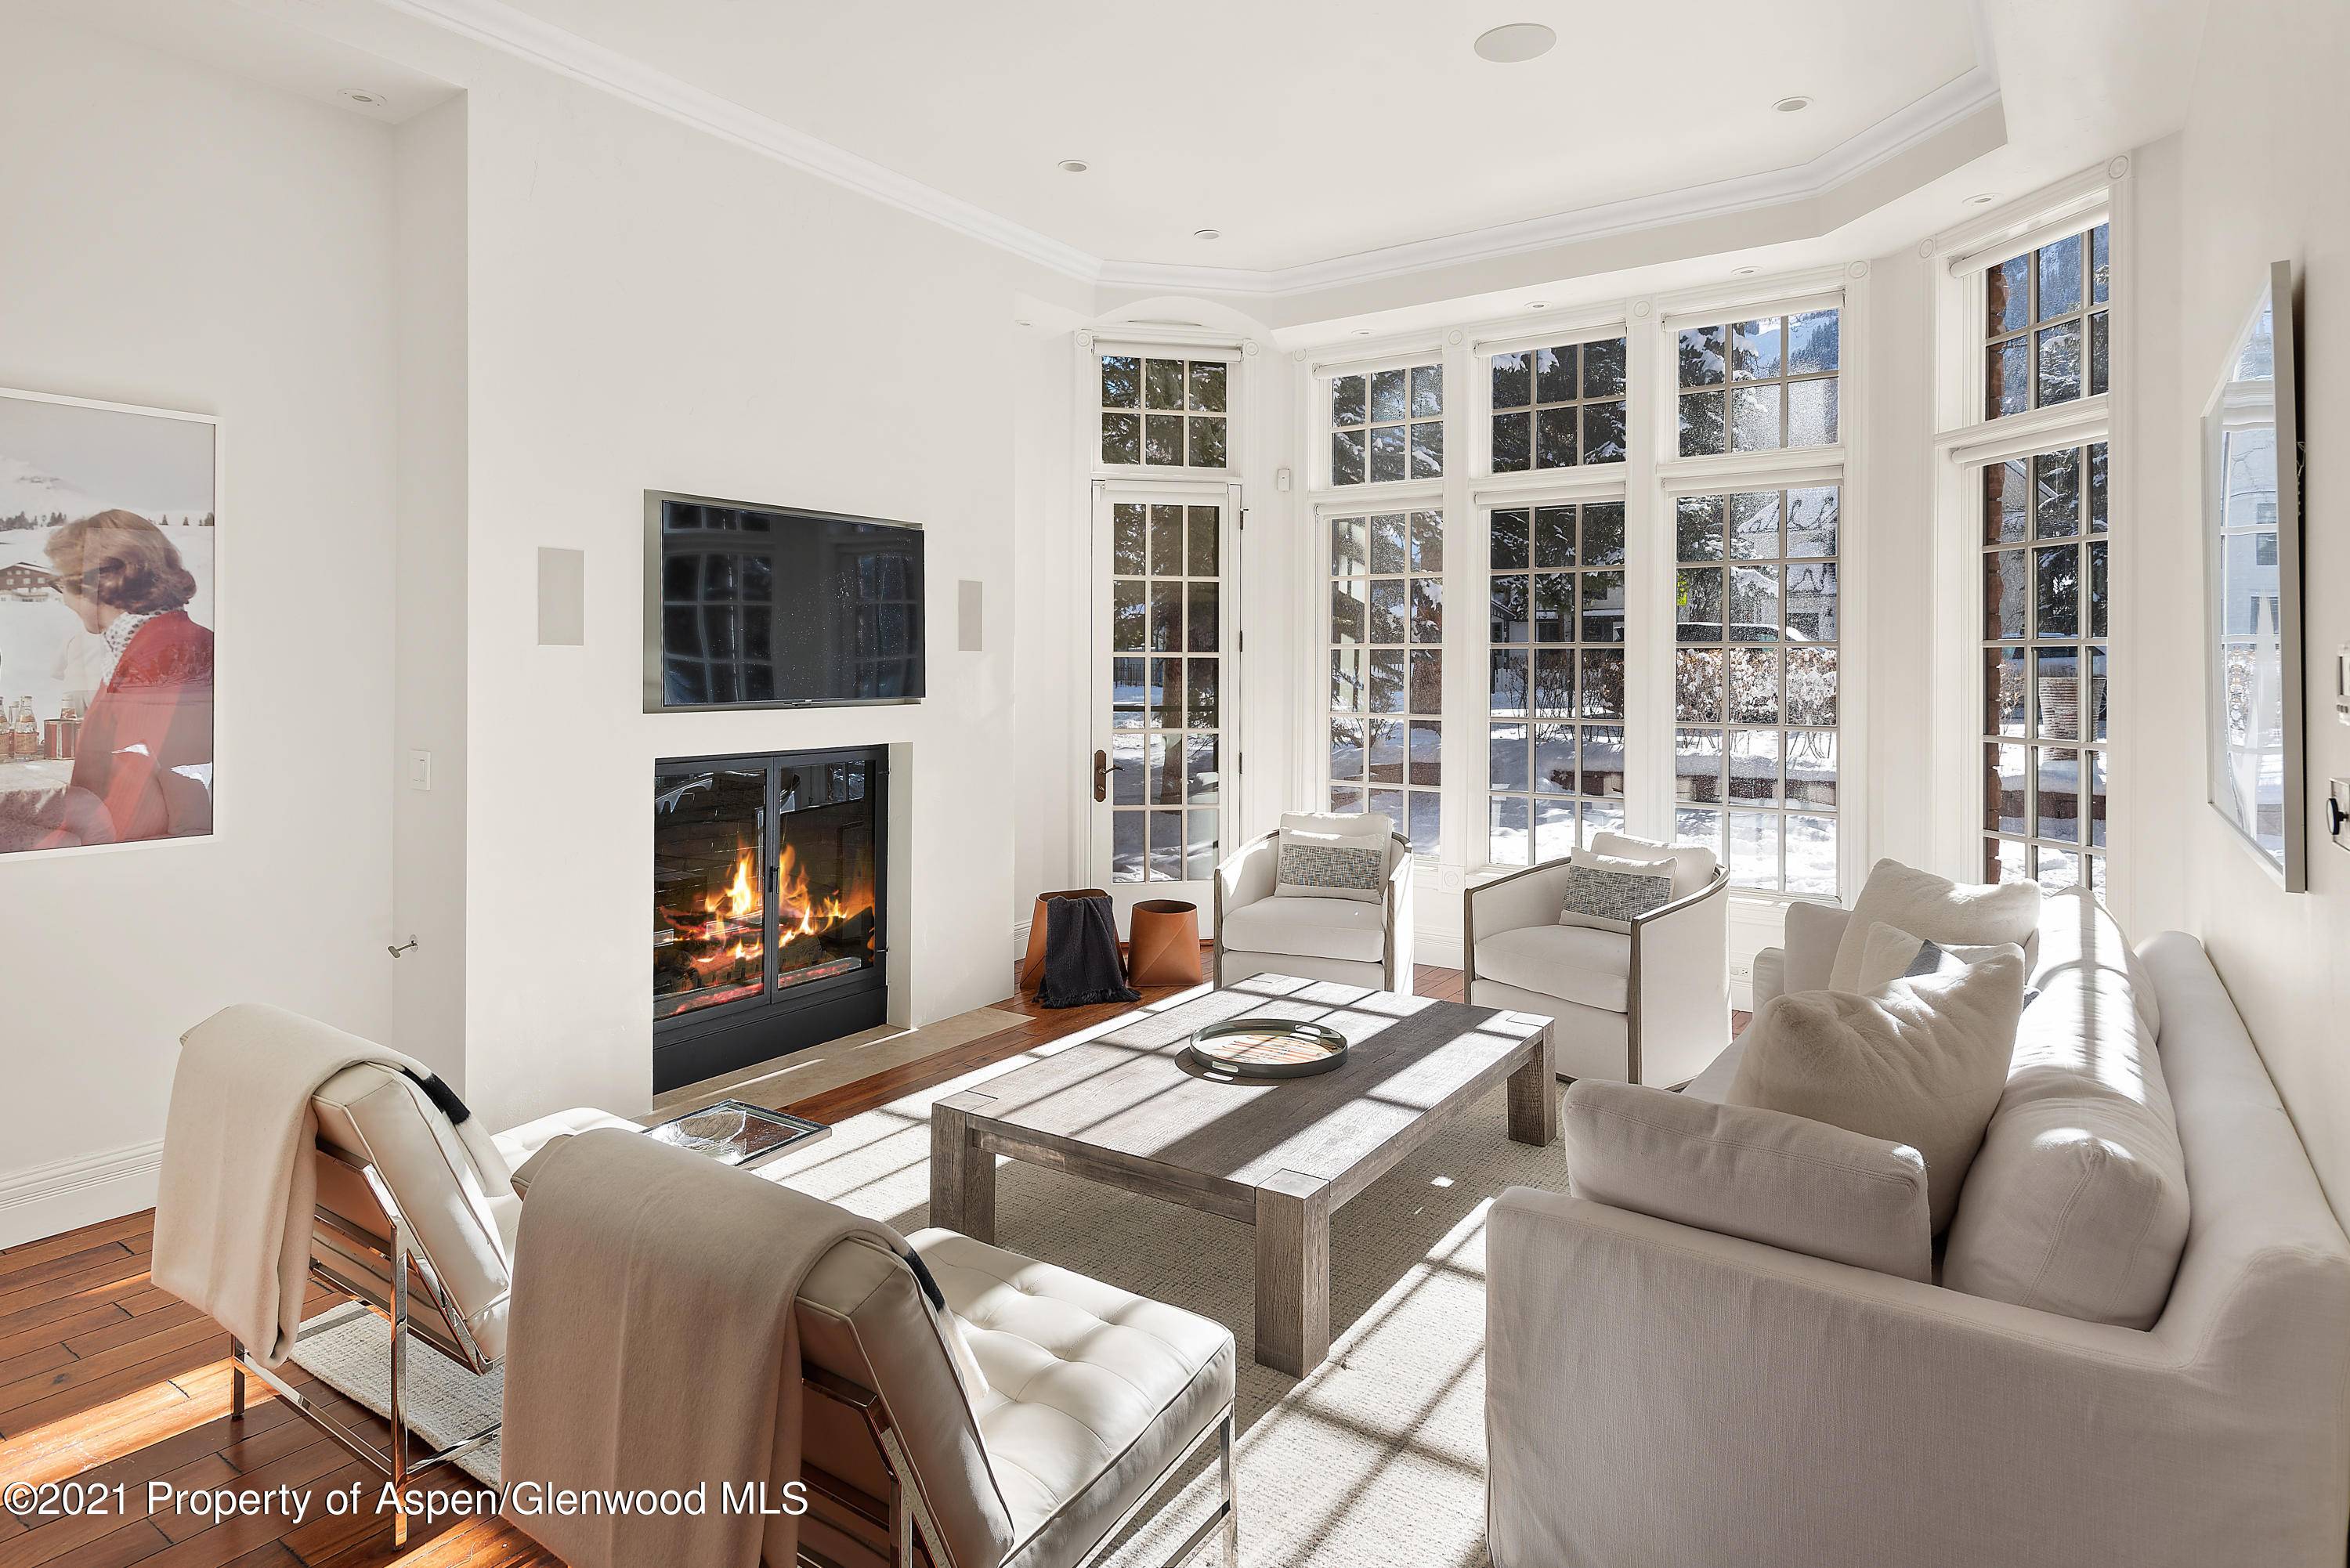 Located in Aspen's Prestigious West End neighborhood, this four bedroom home has been recently updated in a contemporary style.